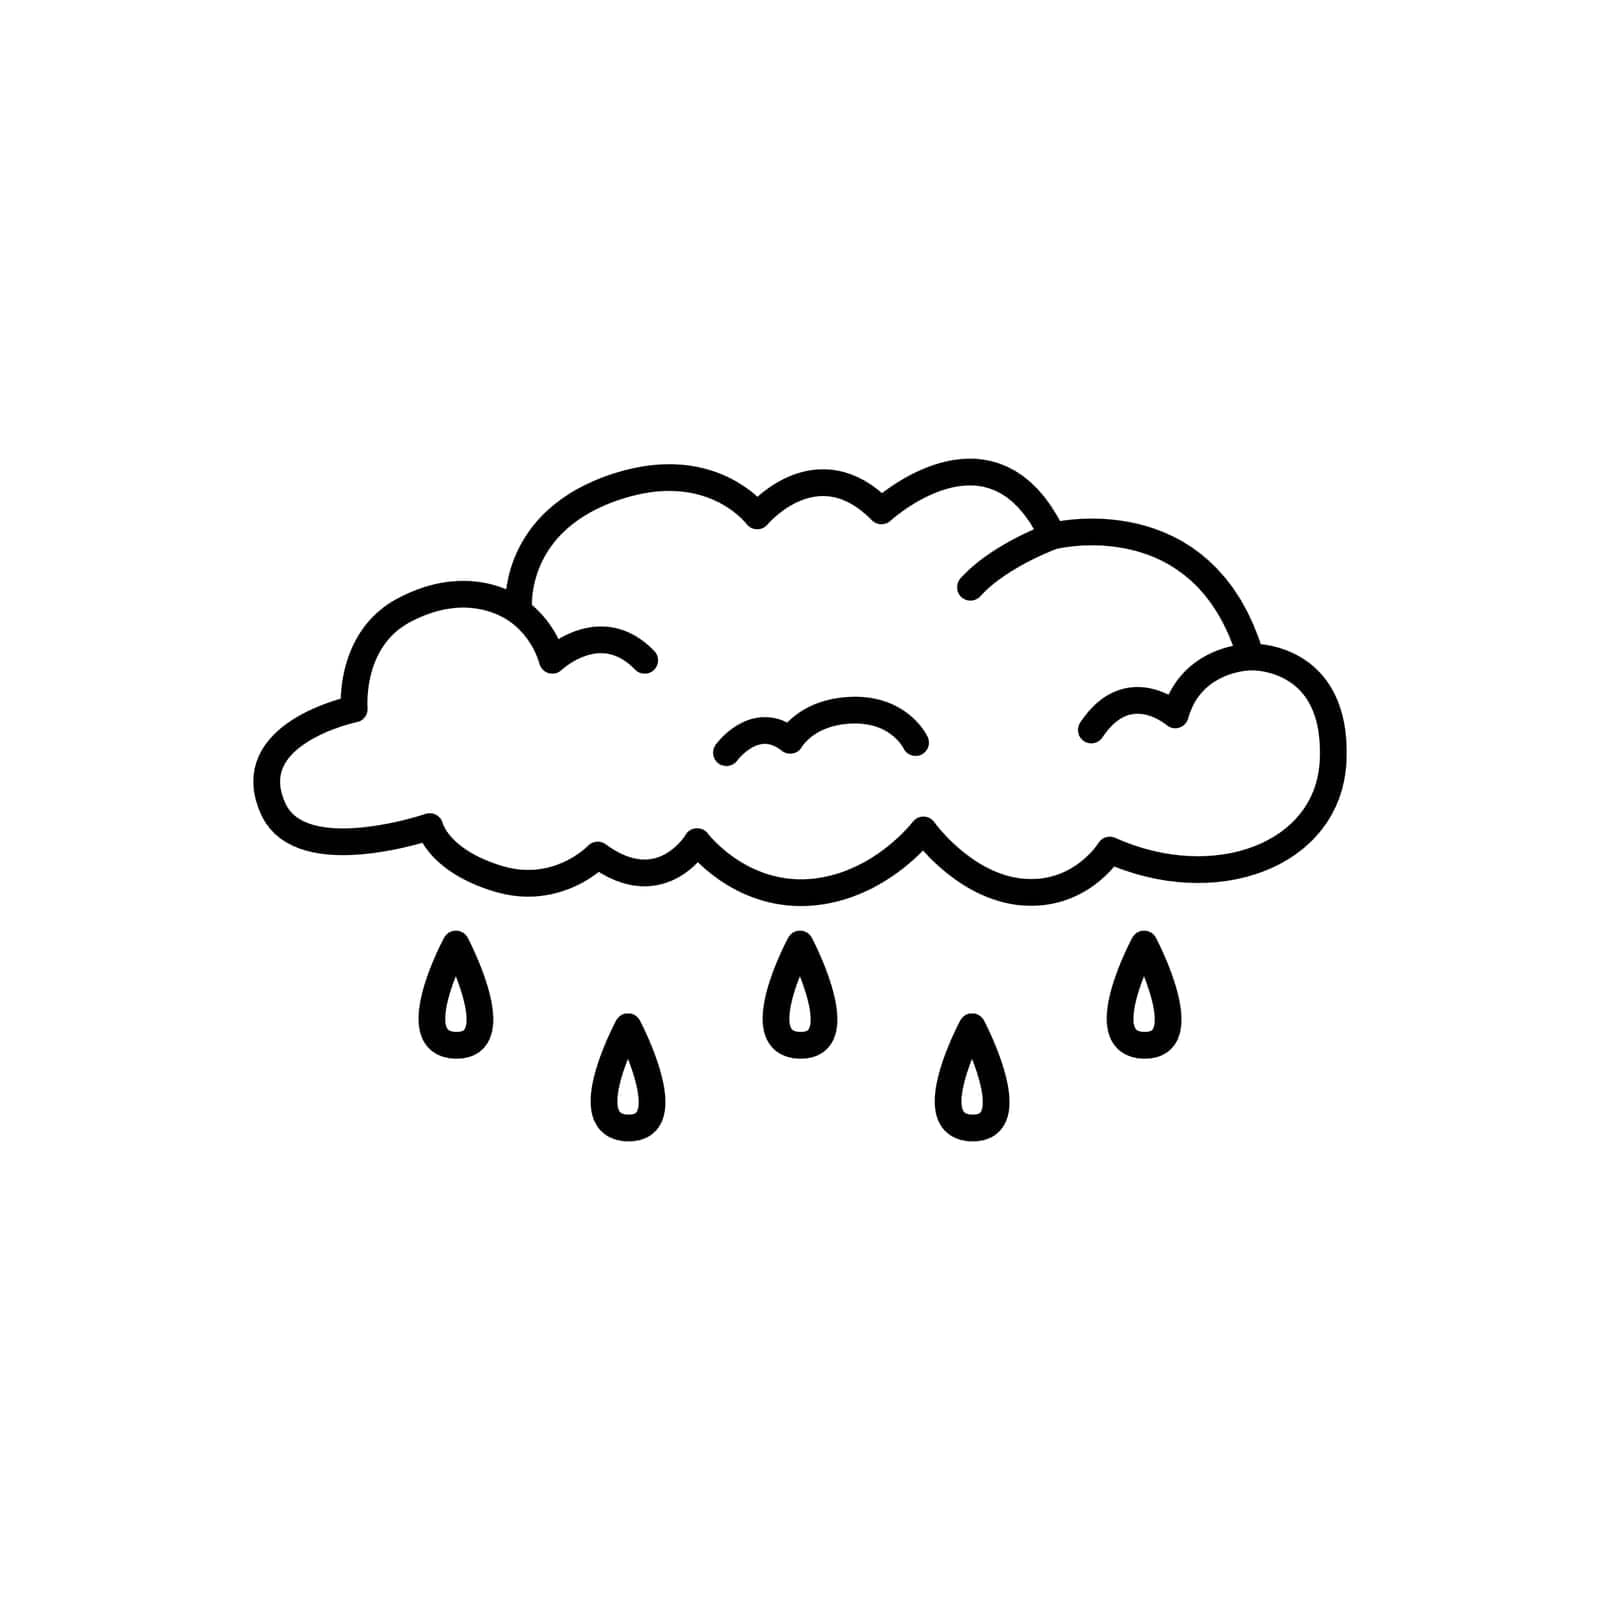 Cloud with raindrops outline icon. Editable stroke. Isolated vector illustration